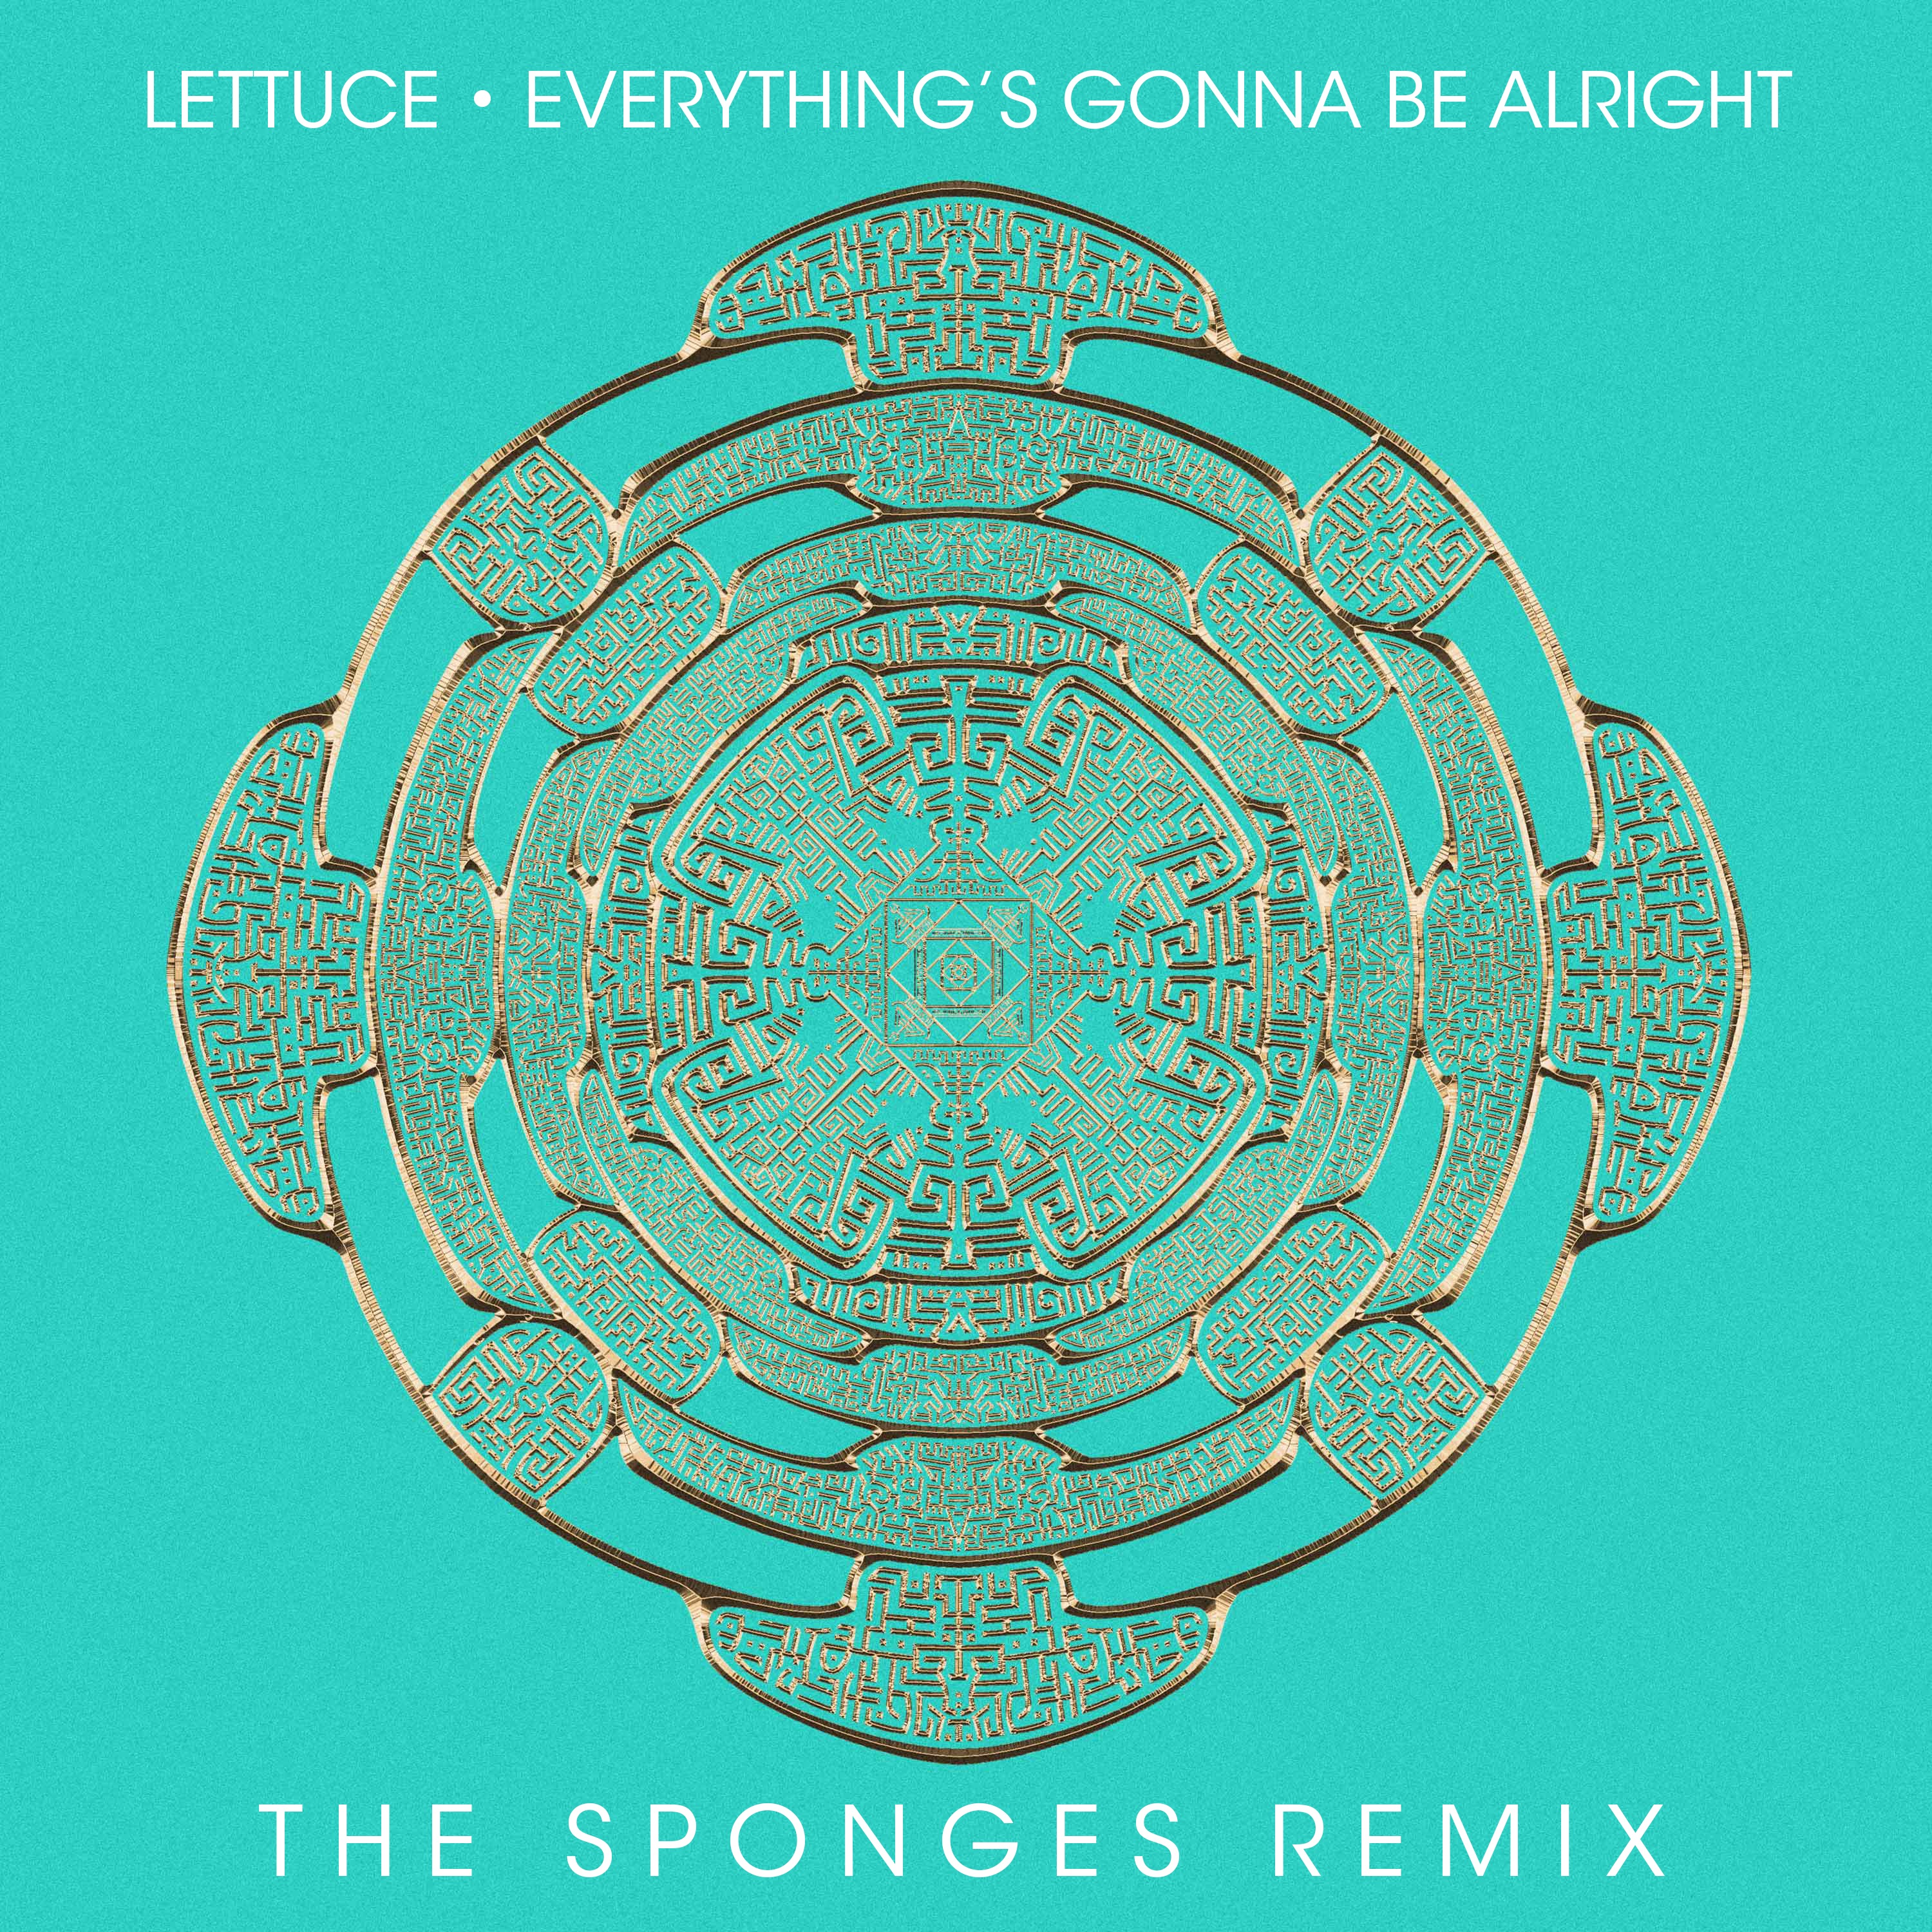 LETTUCE & THE SPONGES REMIX DROPS A FUNKY HOUSE TWIST ON "EVERYTHING'S GONNA BE ALRIGHT"